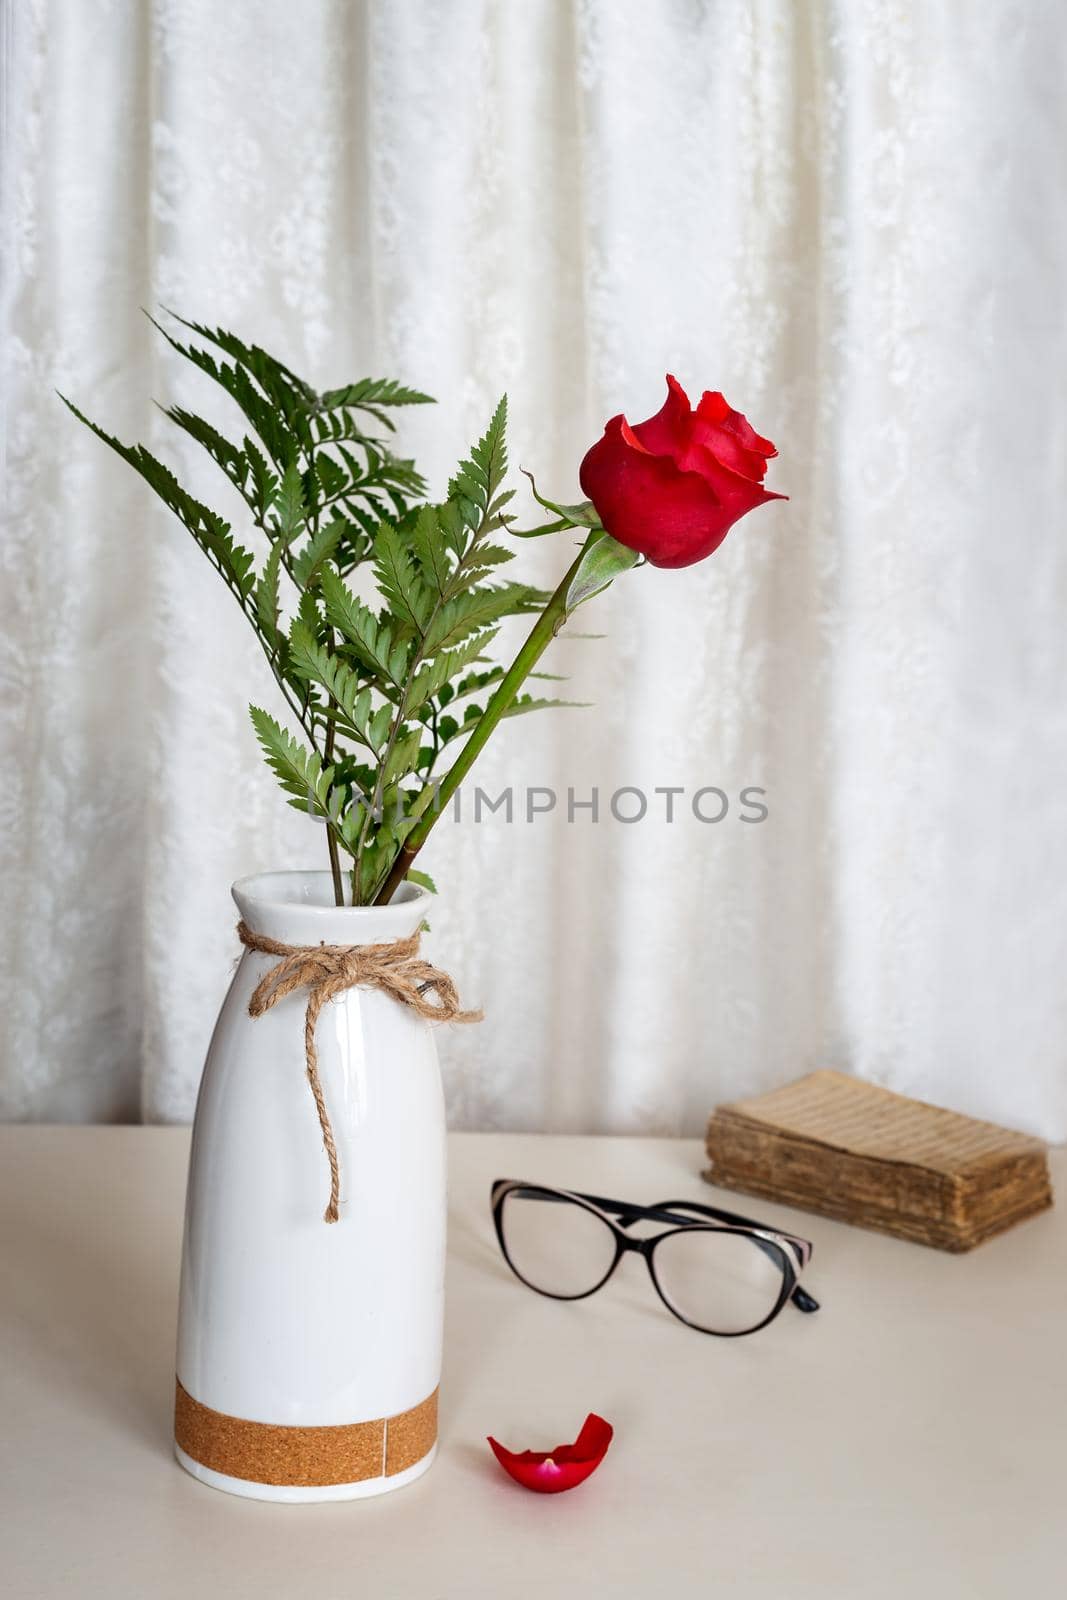 Red rose on the table in a ceramic vase by georgina198